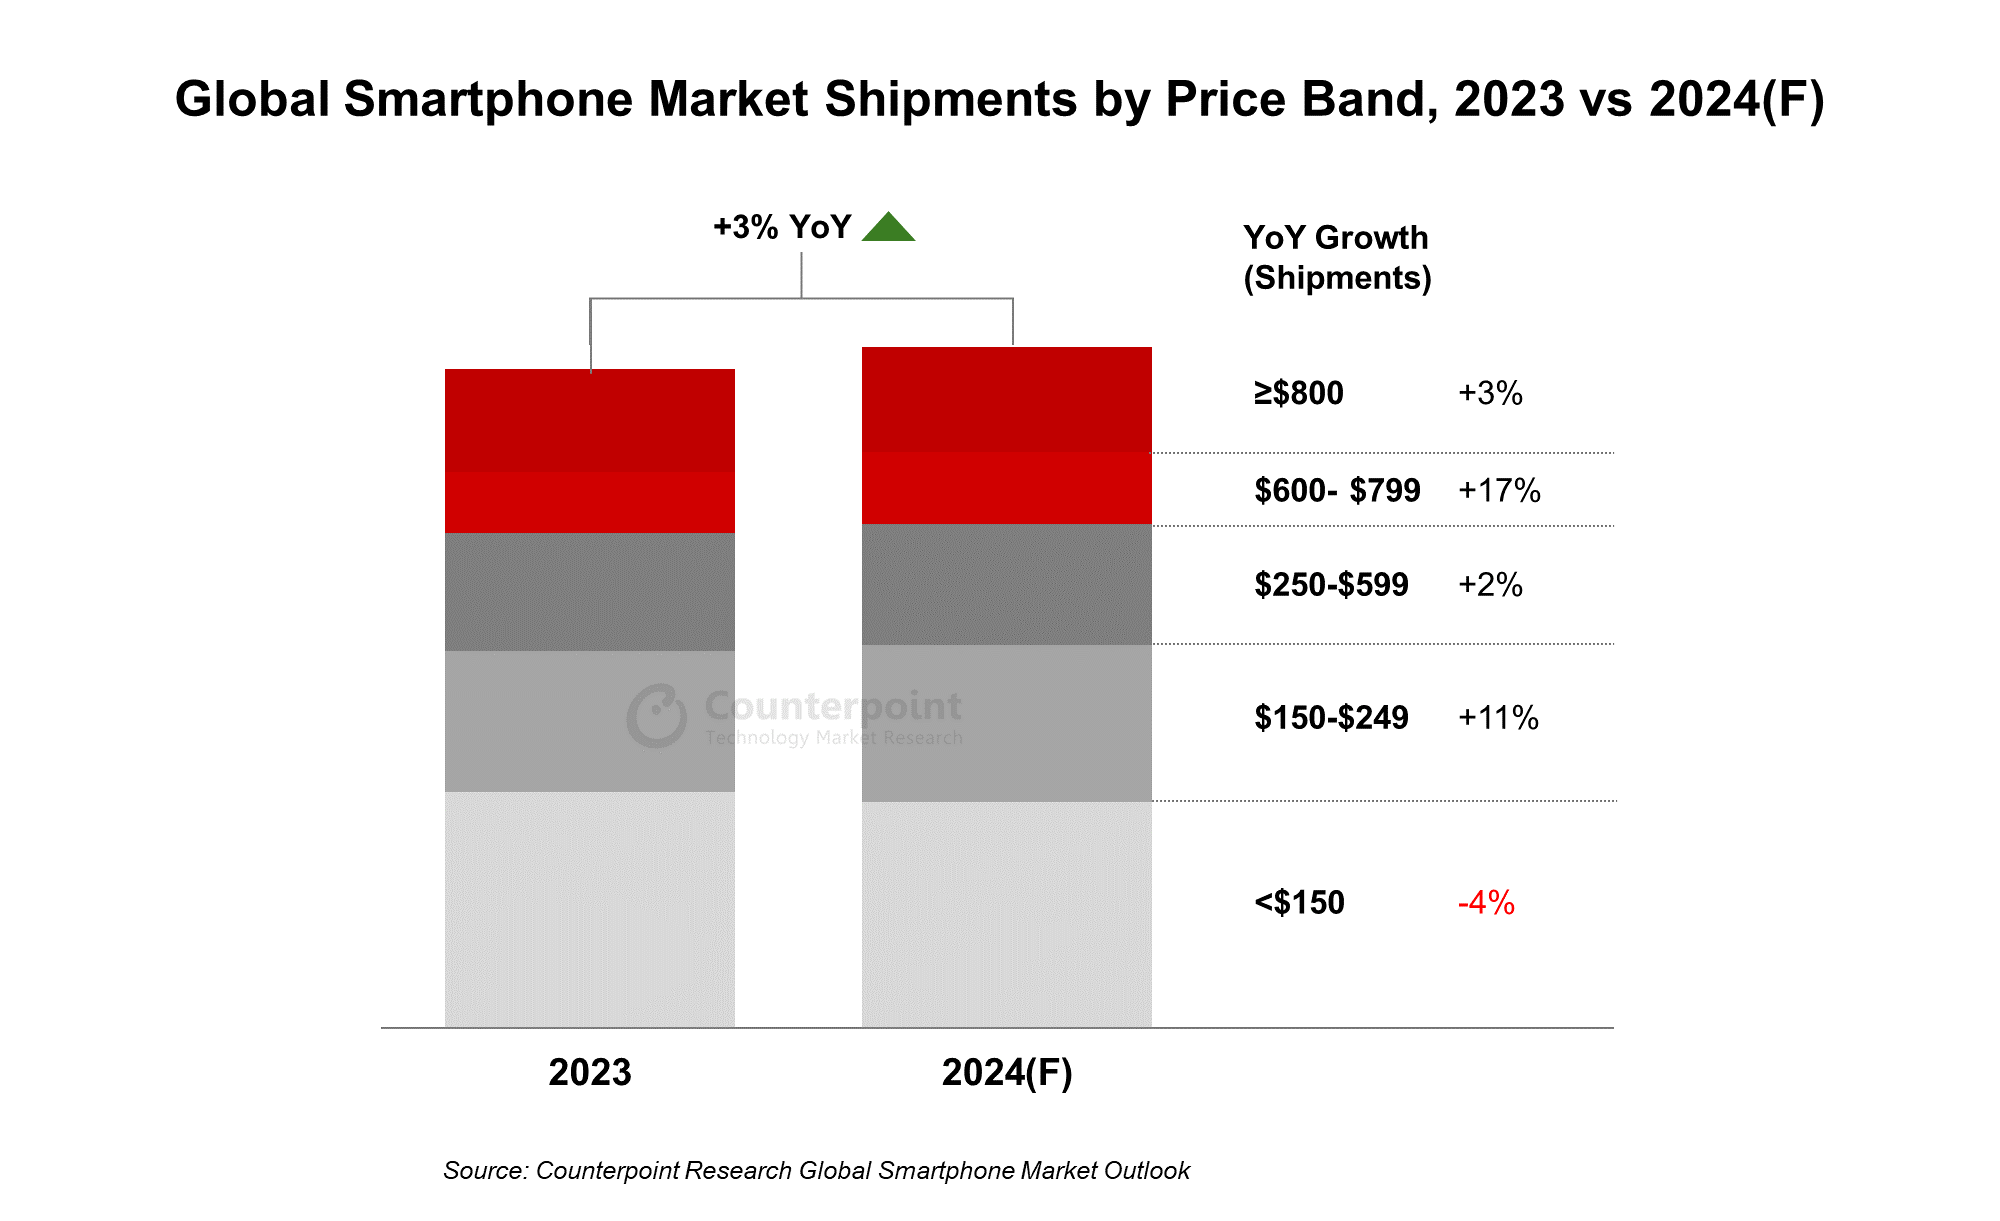 Global Smartphone Market Shipments by Price Band, 2023 vs 2024(F)